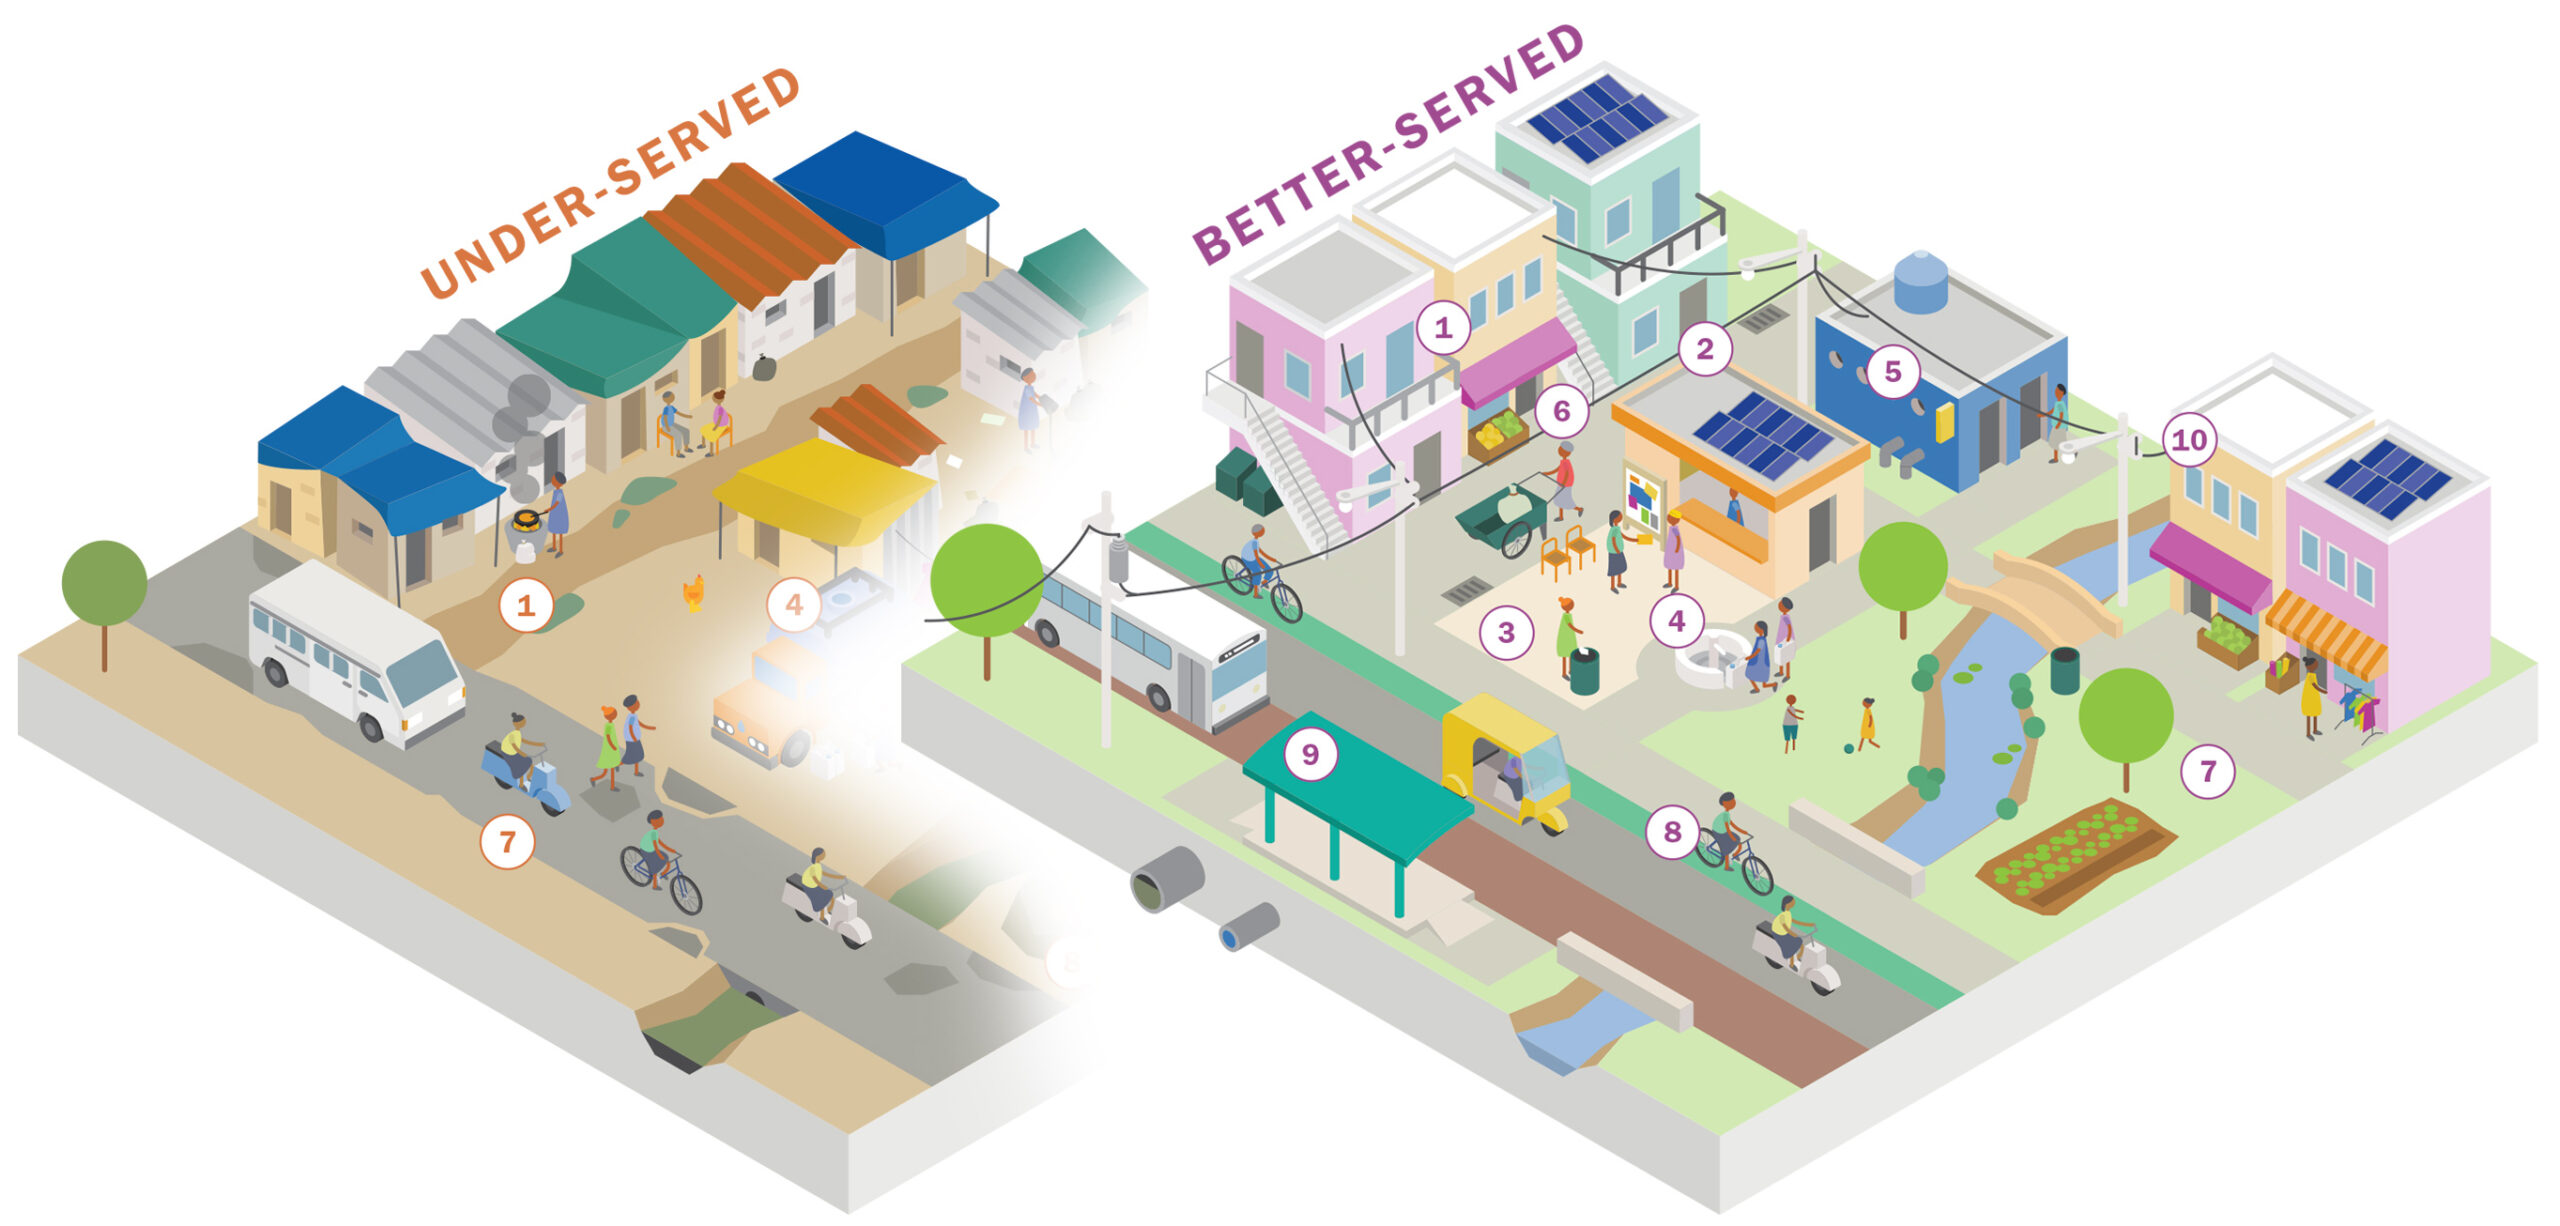 Illustrations produced by Graphicacy for World Resources Institute, for their Seven Transformations for More Equitable and Sustainable Cities report. The illustrations shows a before and after image of the same block. The left scene is titled “Under-served”, and shows a slum with no access to indoor plumbing, no clean water, no public transport. The right scene is titled “Better Served”, and shows the same scene upgraded without displacing residents, with access to clean water, public transport.